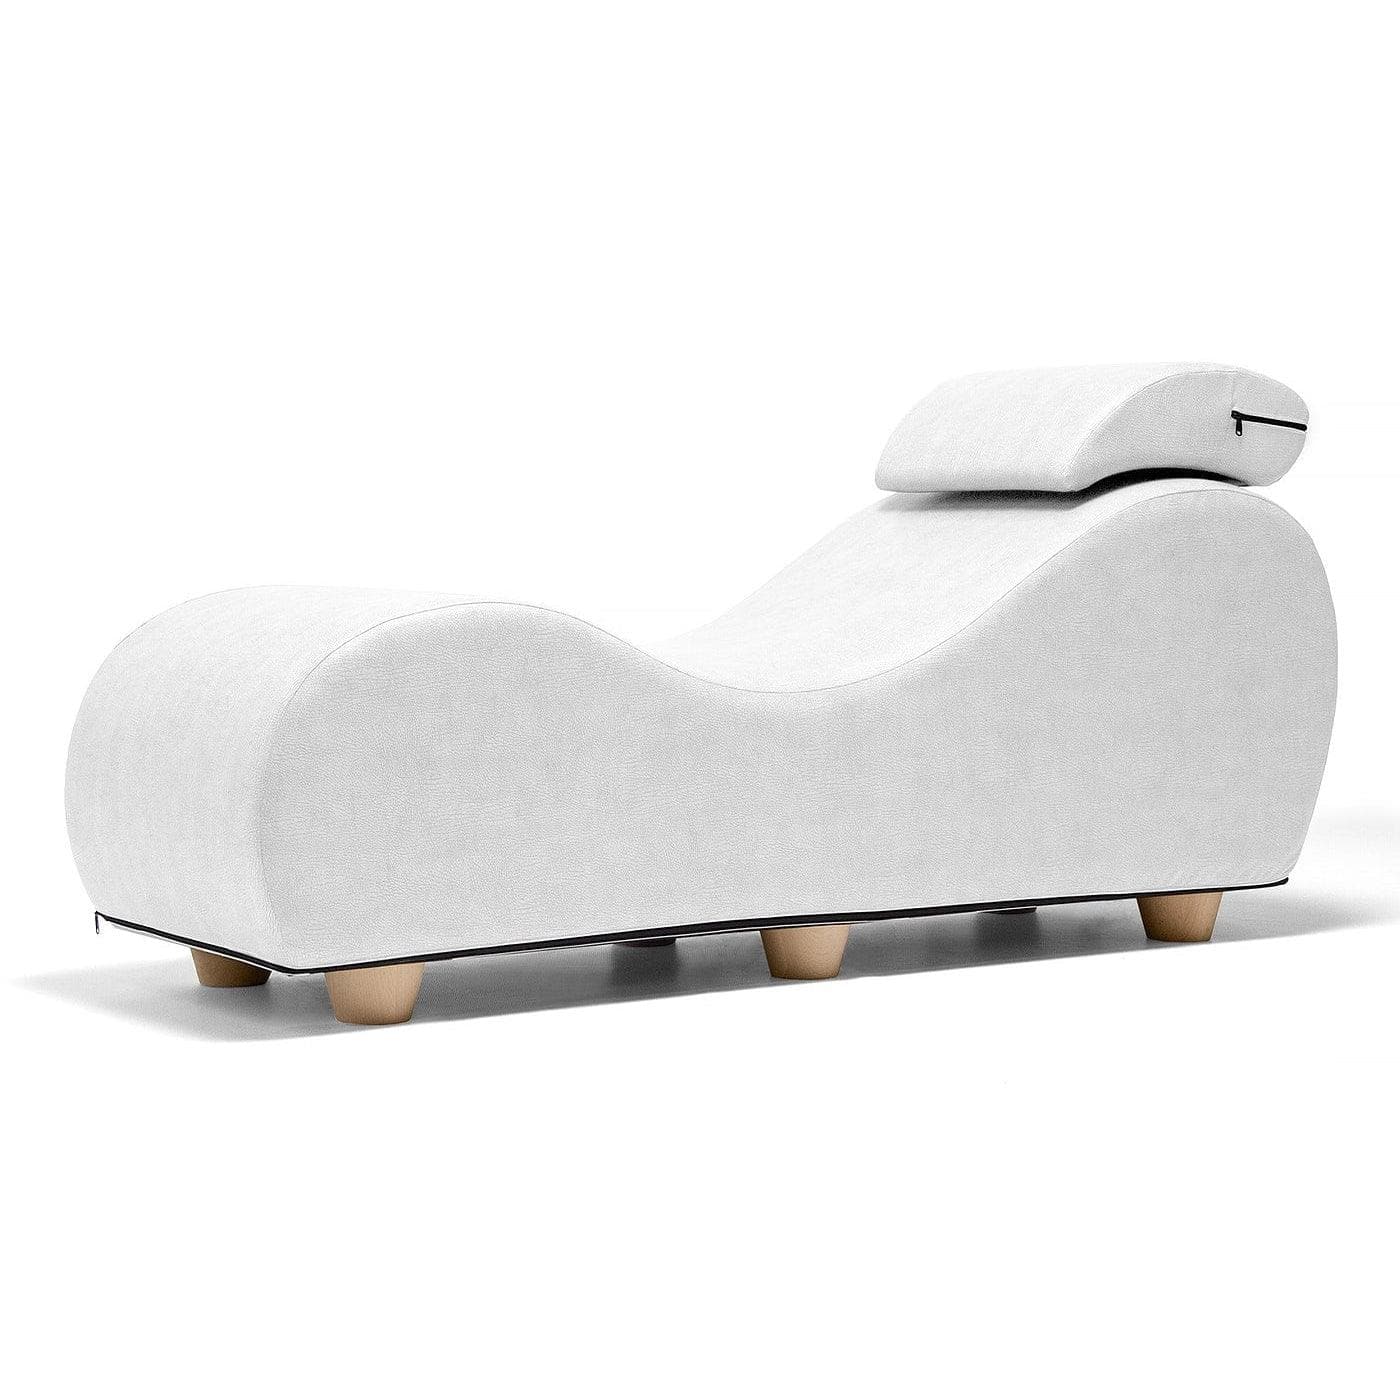 Liberator Esse Chaise II Luxurious Sex Chaise with Wood Feet - Romantic Blessings